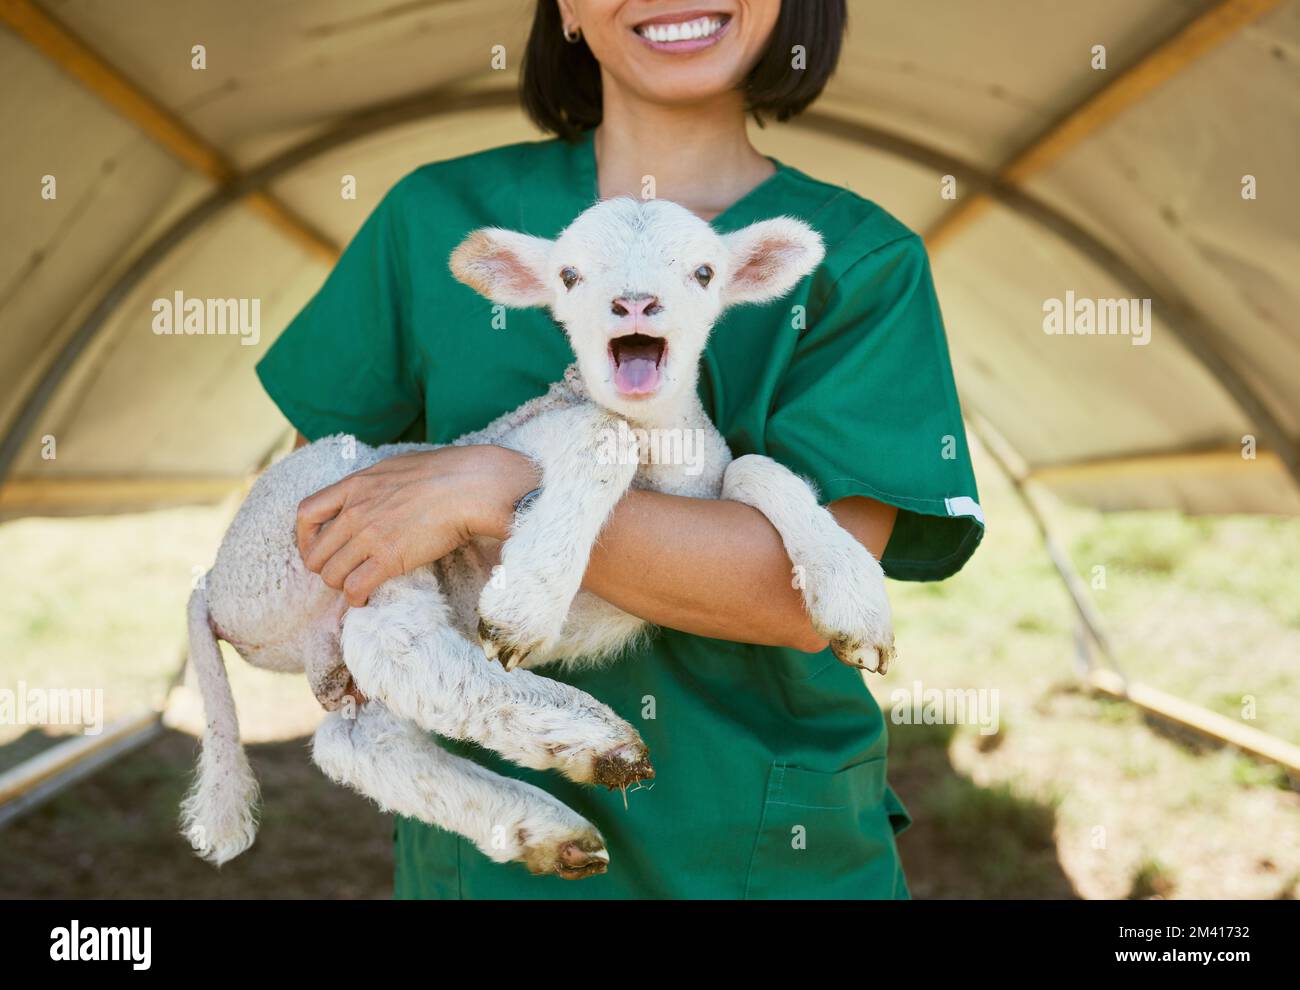 Lamb, baby animal and vet woman at a farm or zoo for health and wellness of farming animals with care and medical help. Veterinary, nurse or doctor in Stock Photo